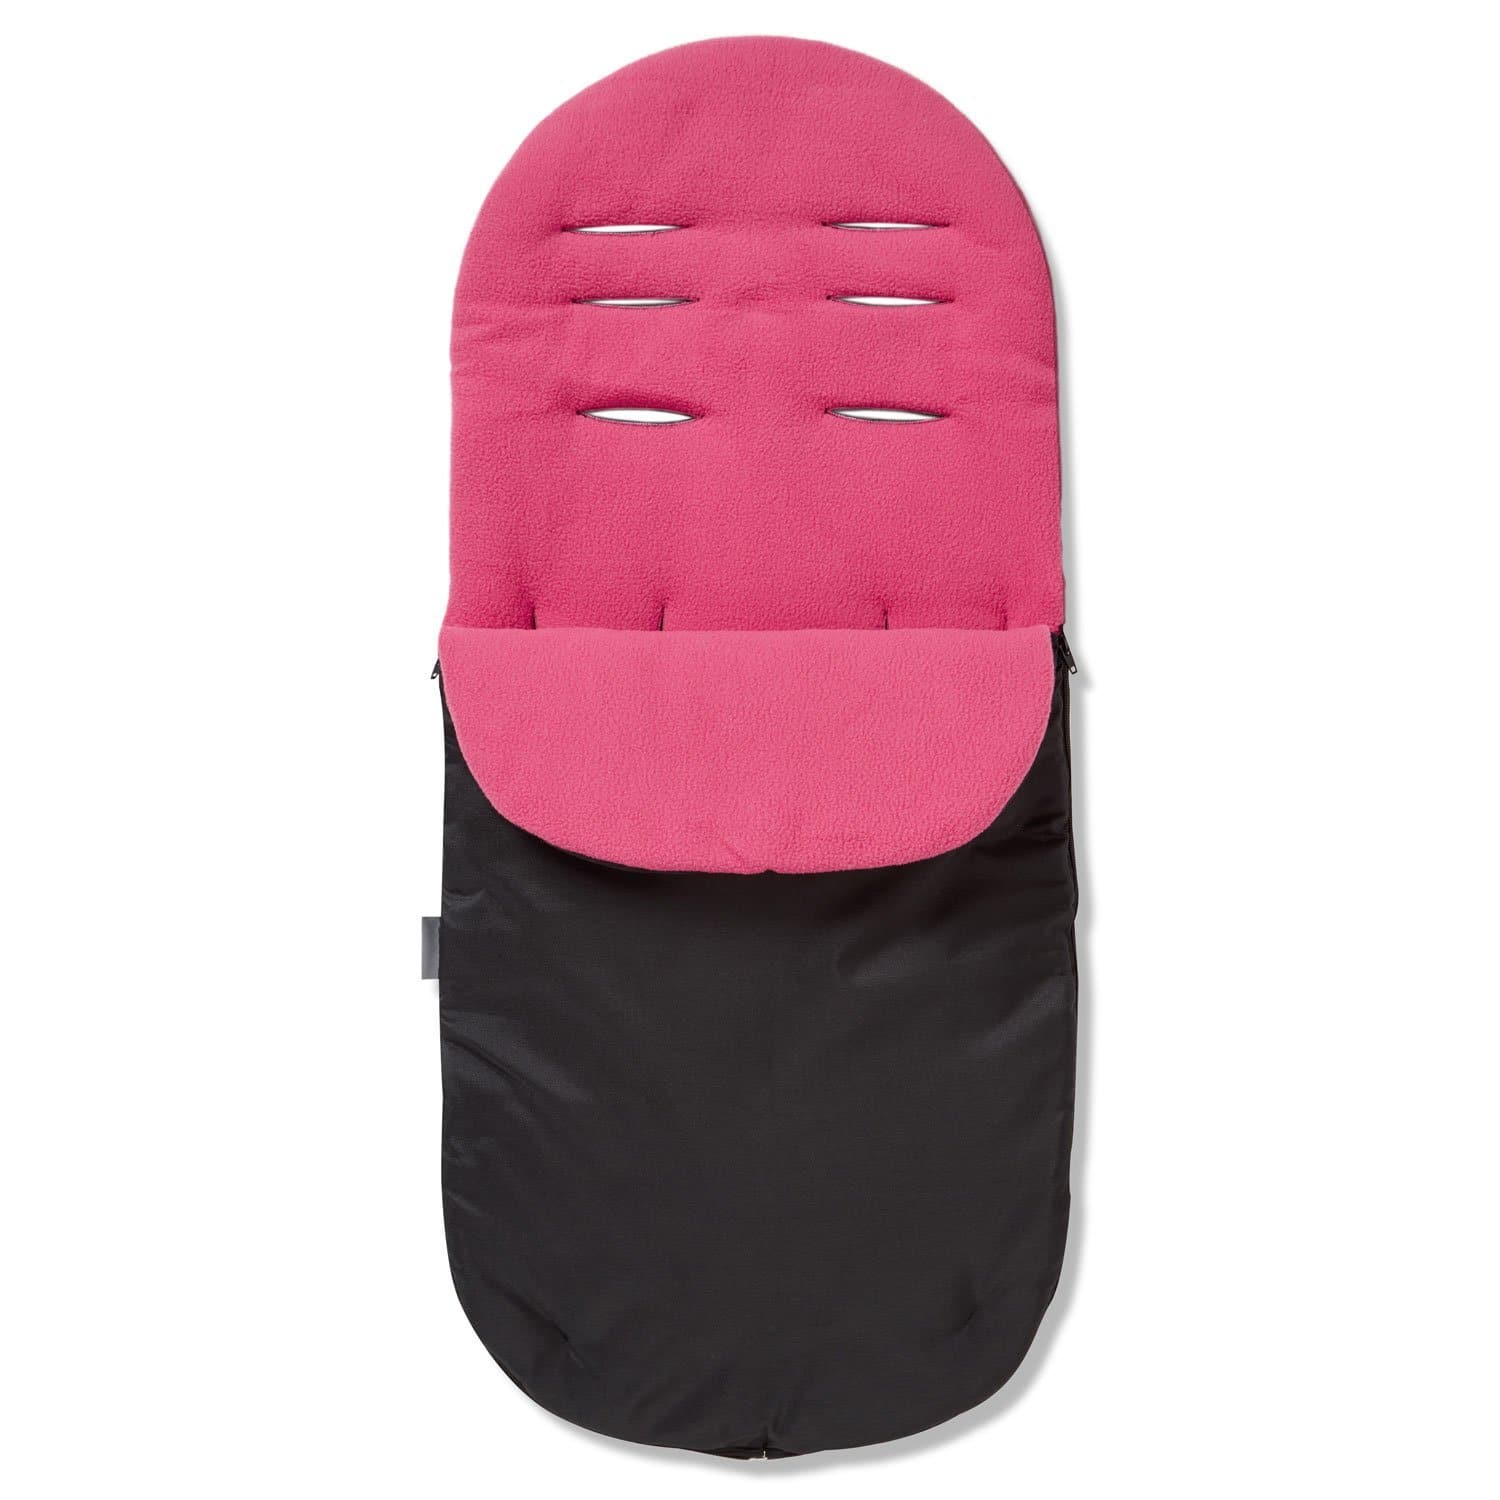 Footmuff / Cosy Toes Compatible with Teutonia - Dark Pink / Fits All Models | For Your Little One